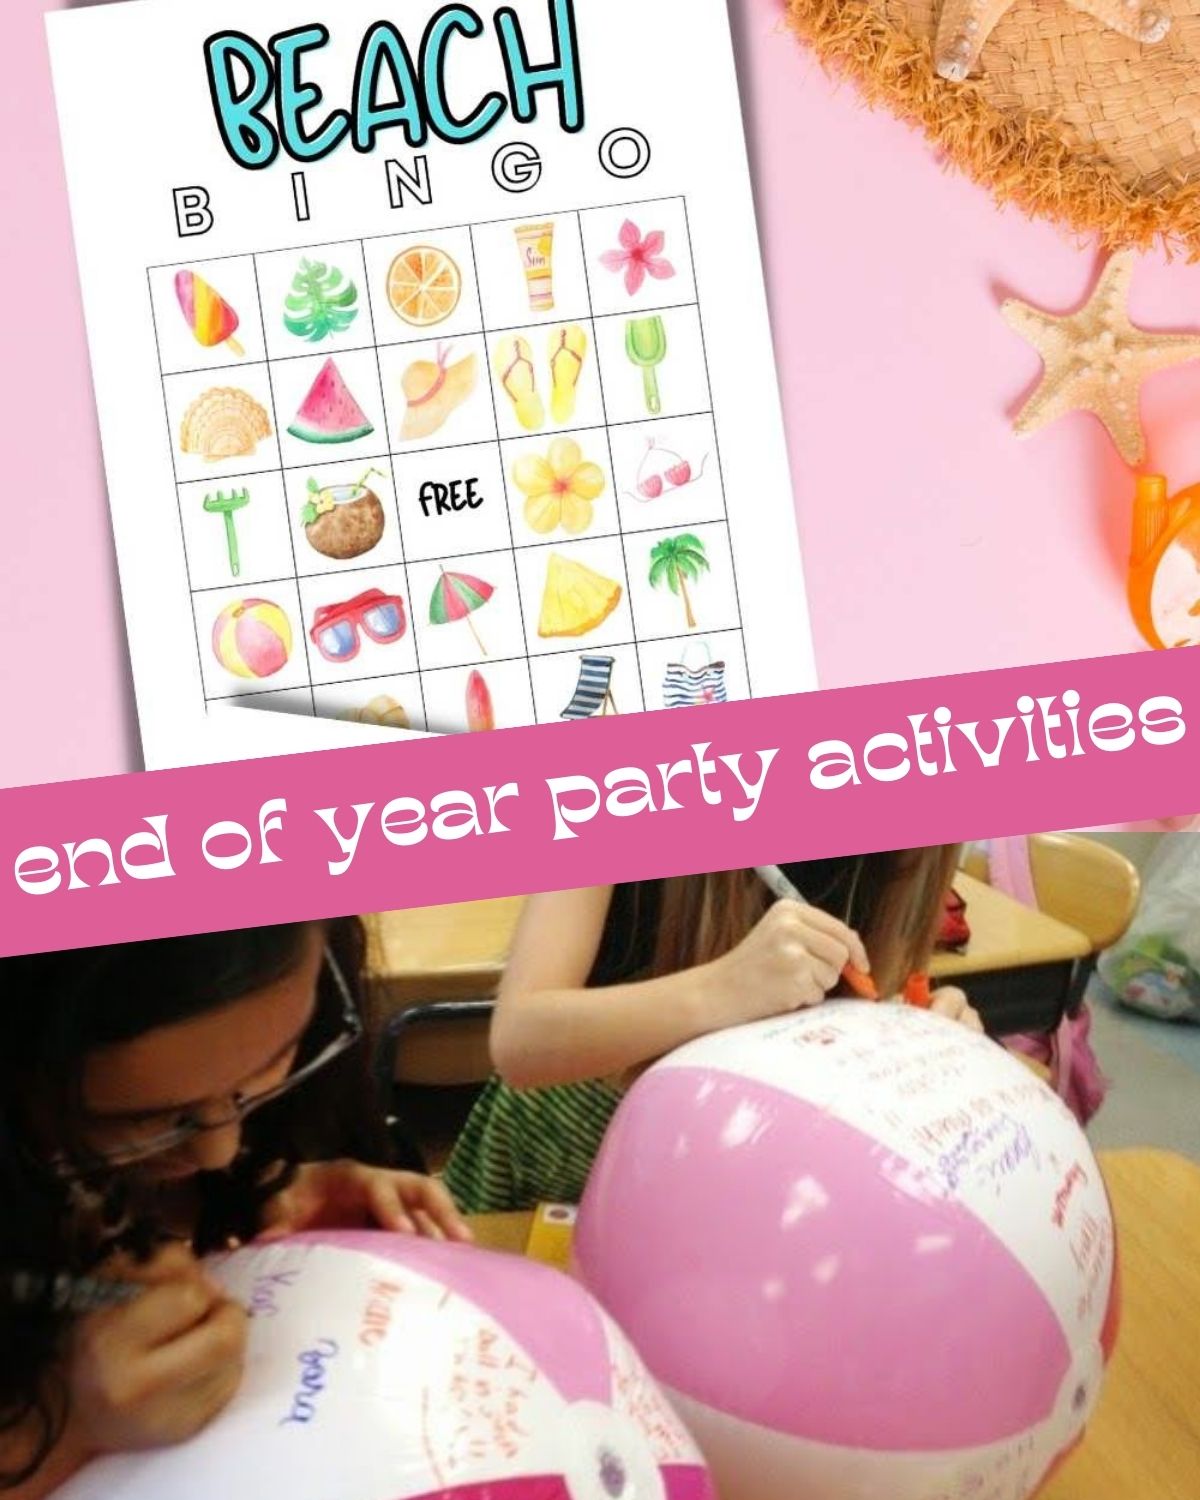 Fun activities for an end of year party 